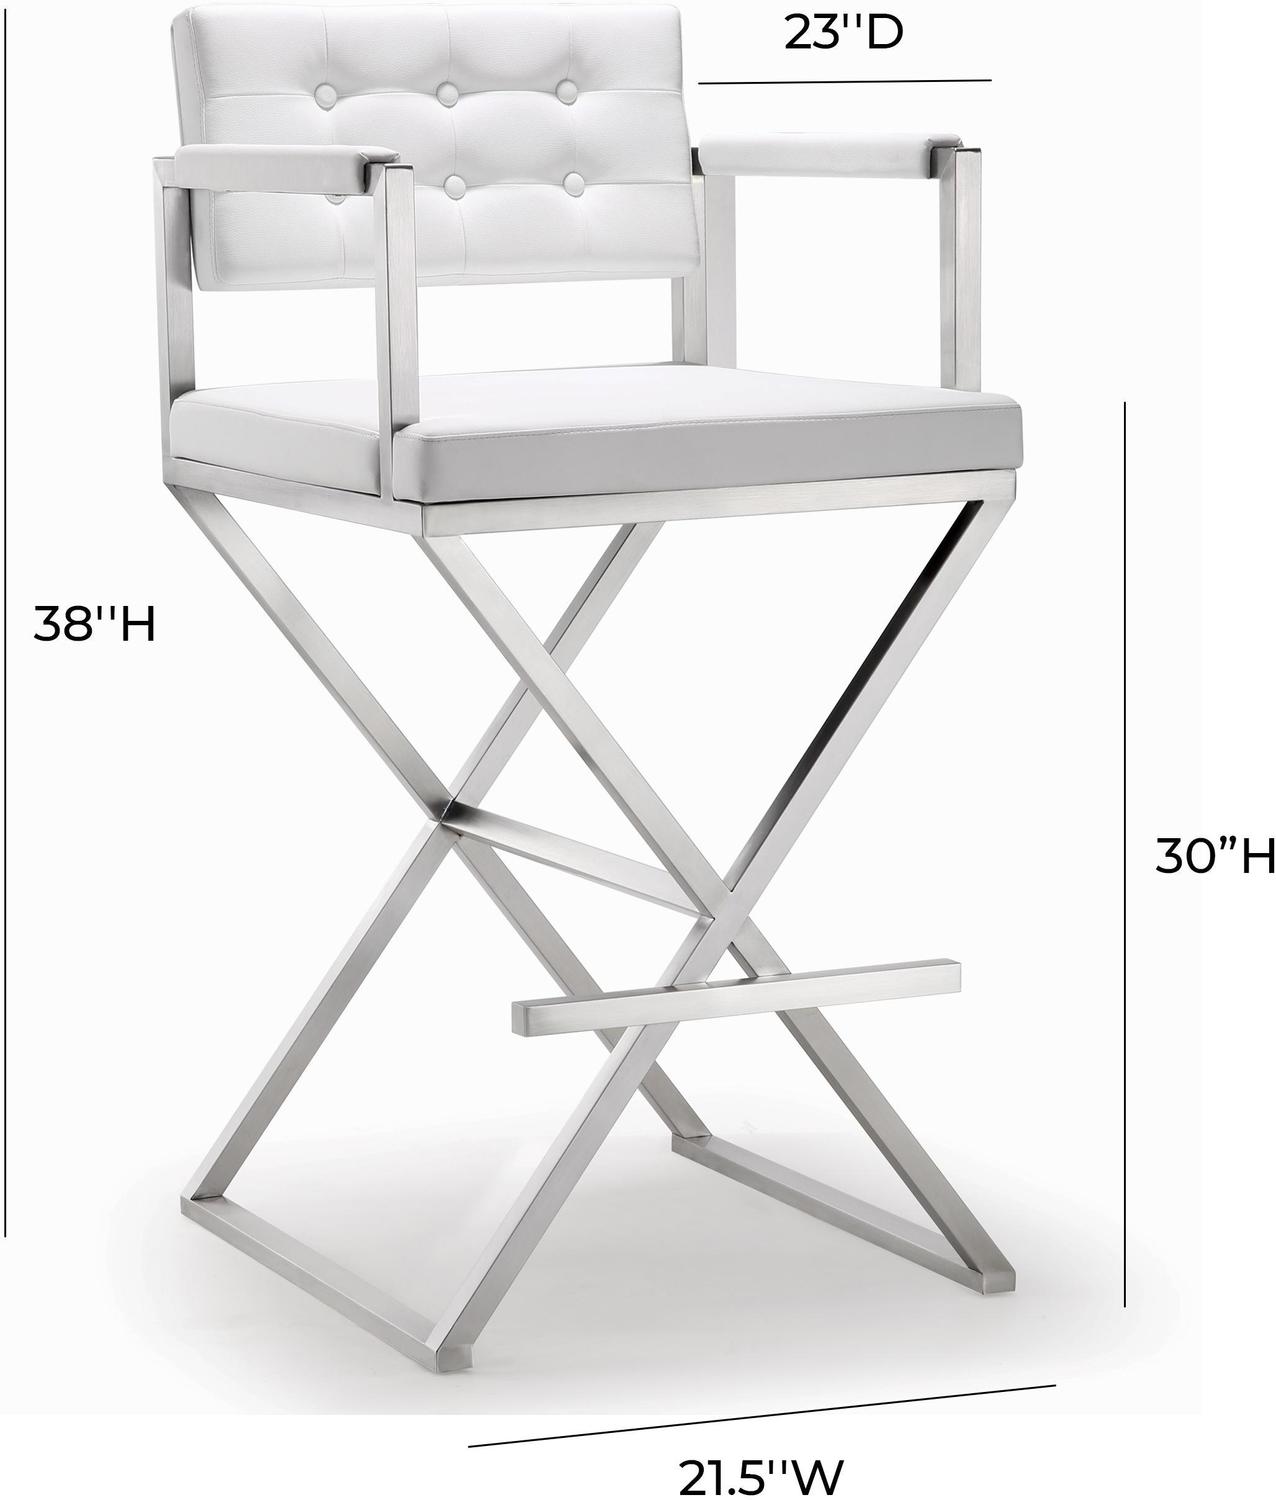 height stool table Contemporary Design Furniture Stools White